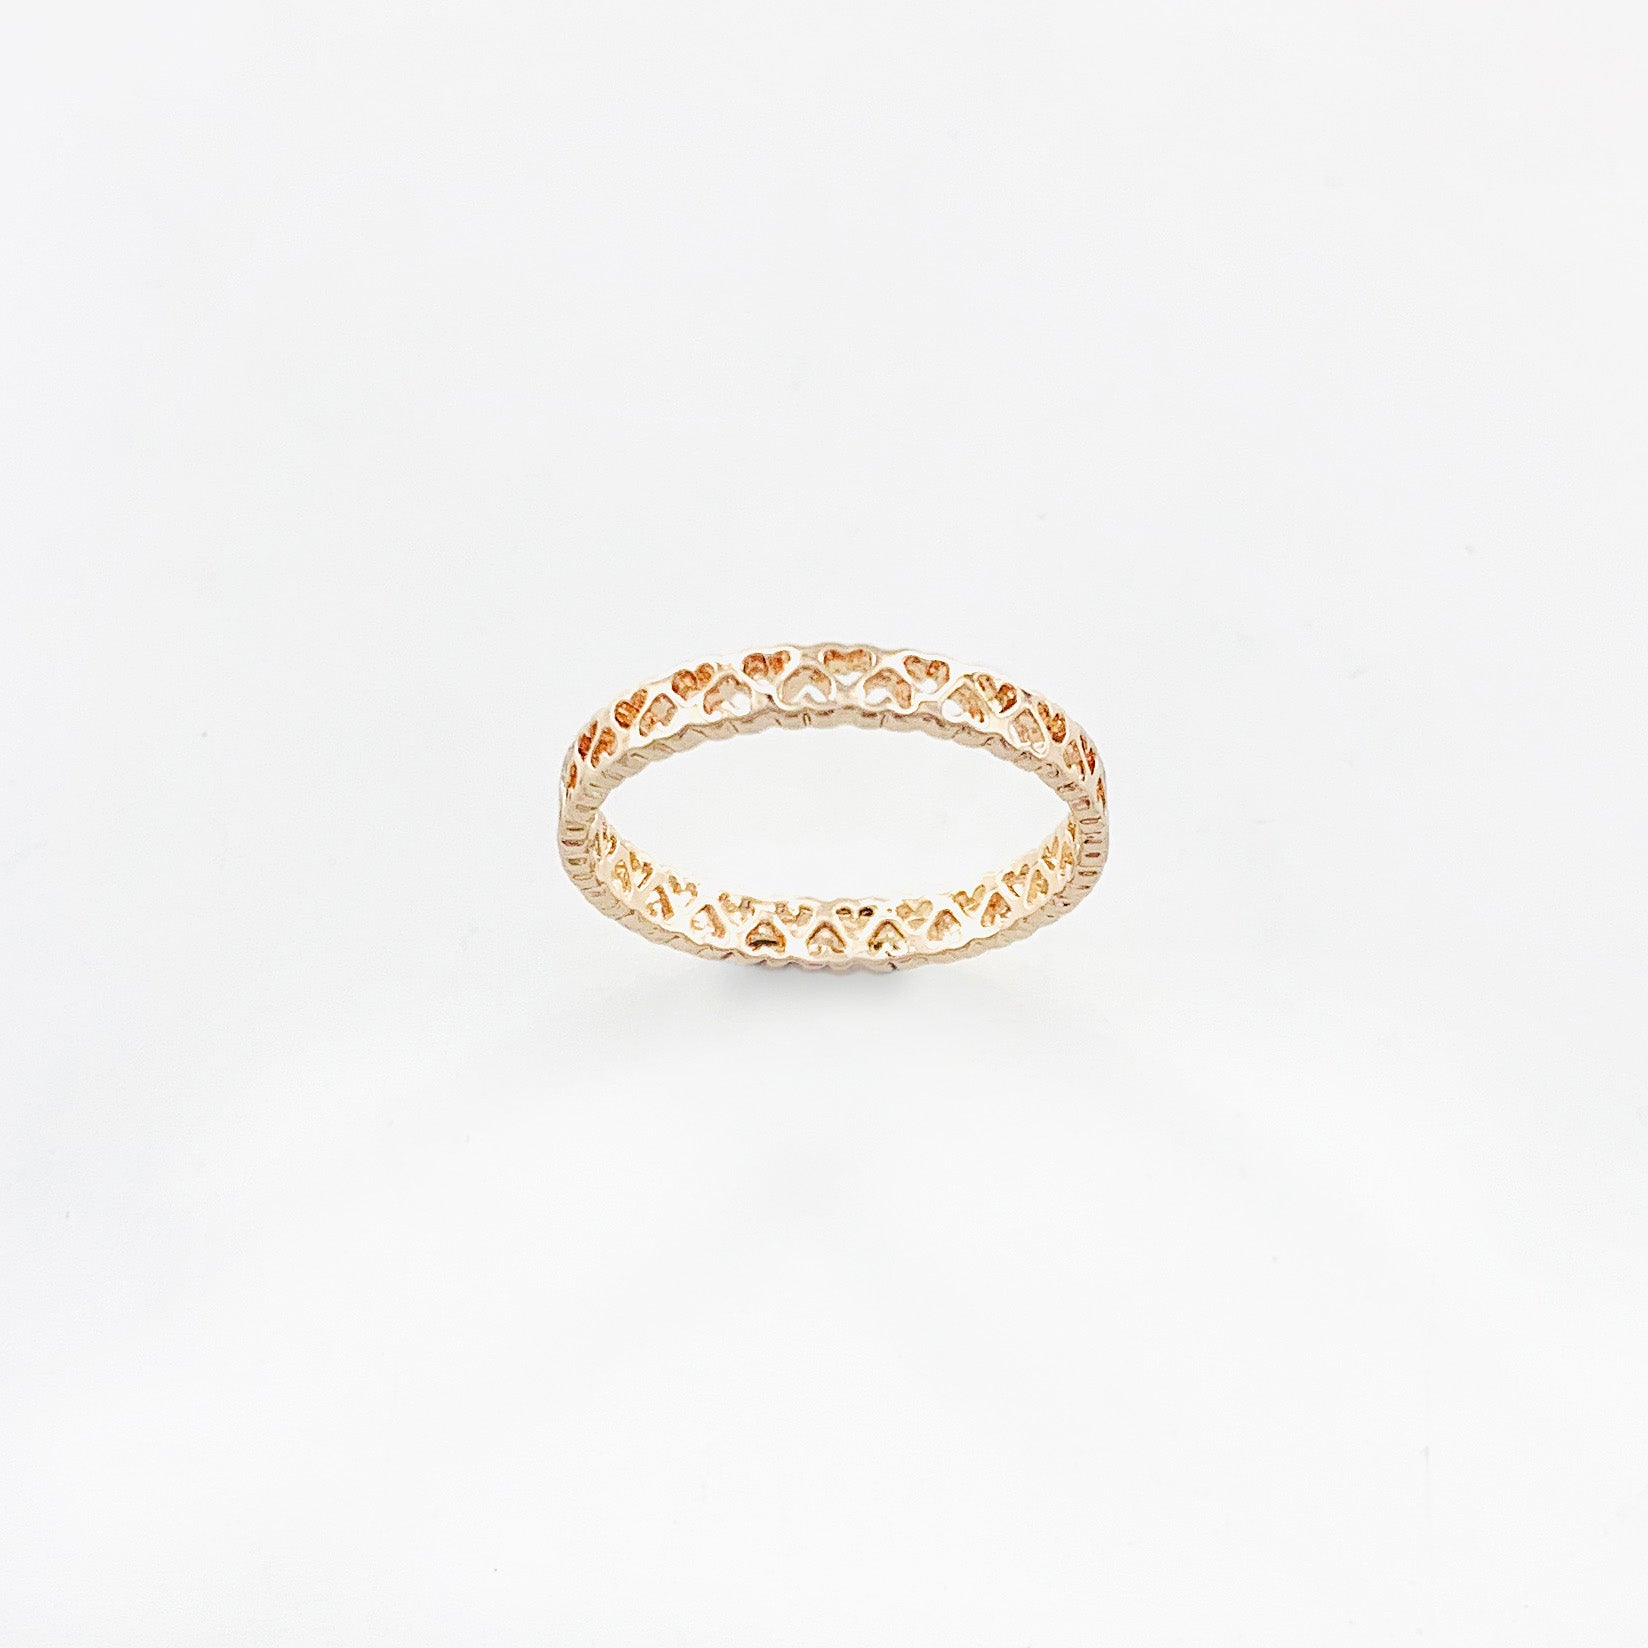 Thin rose gold band with mini heart cut-outs